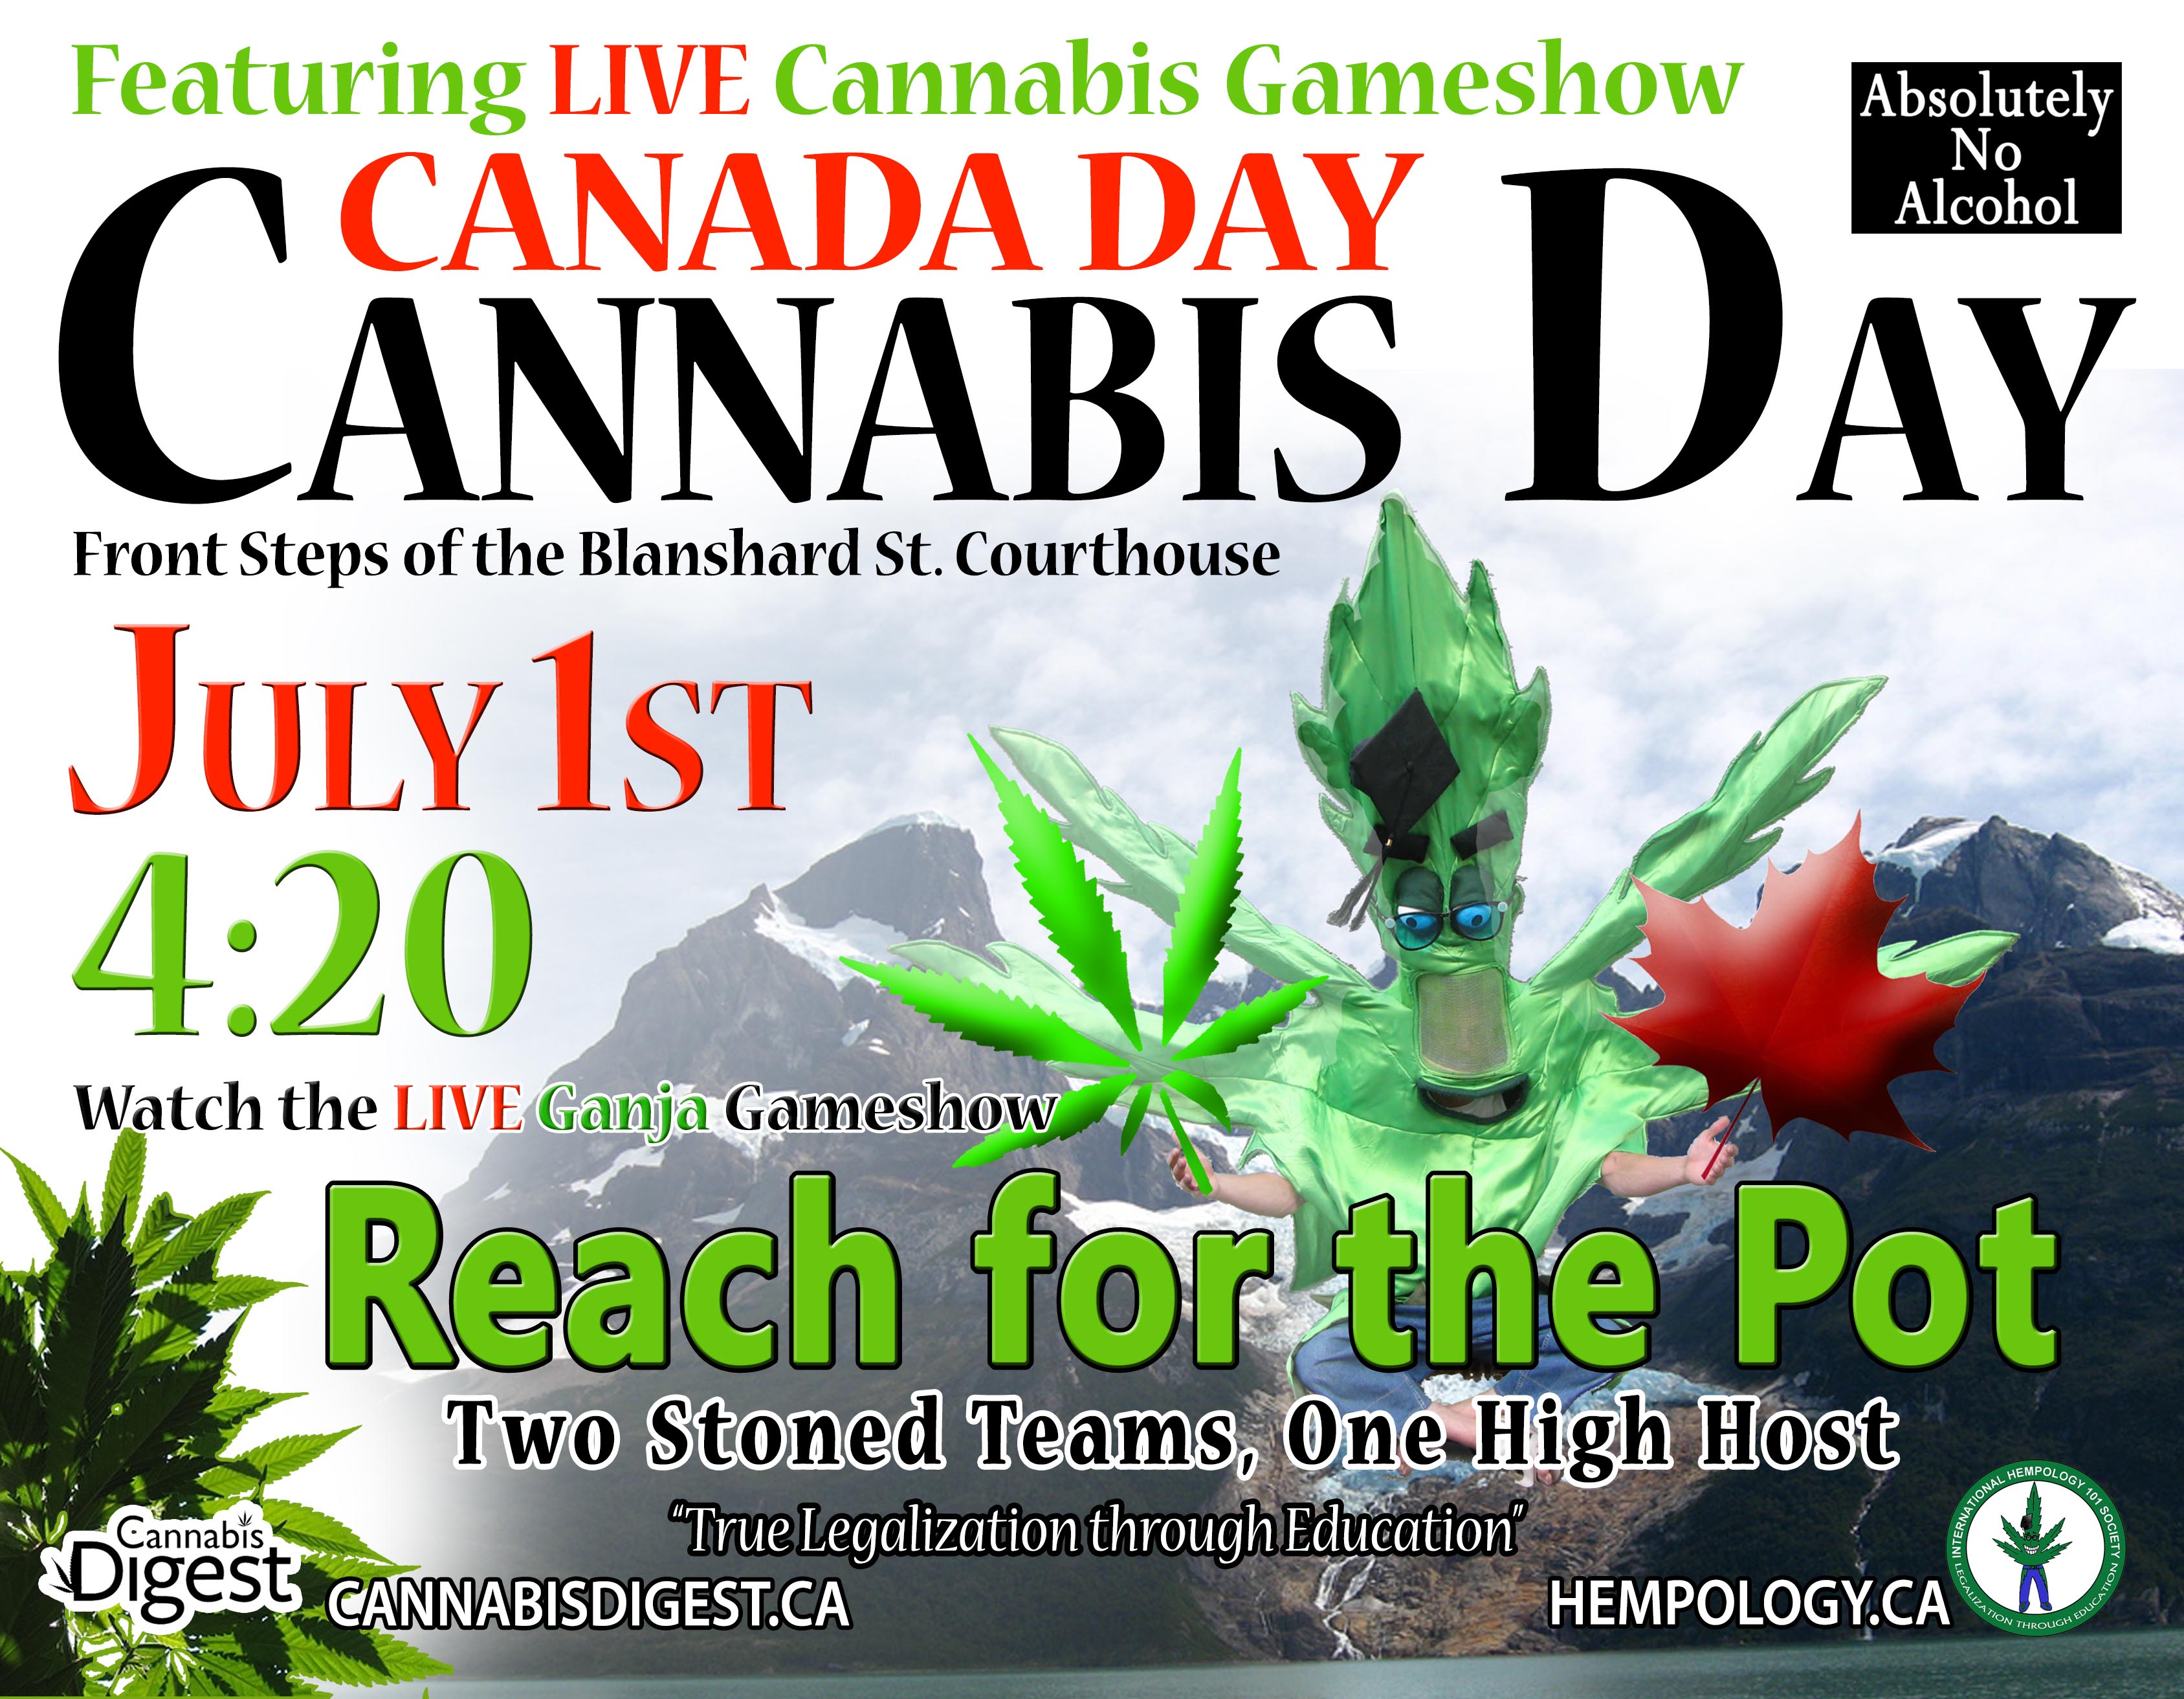 July 1st is Cannabis Day - Cannabis Digest